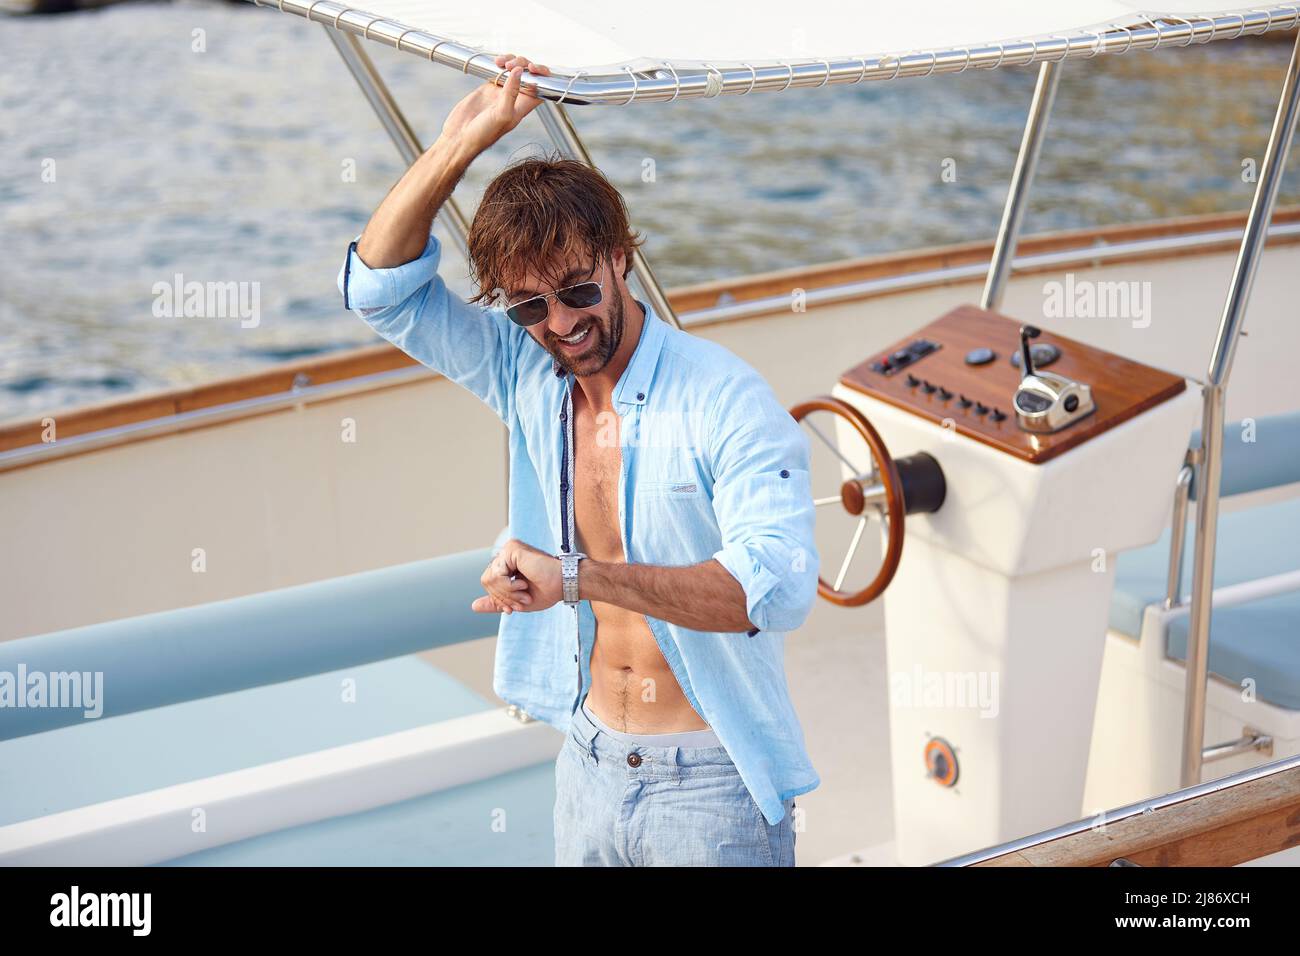 summer time. Handsome young man on his sailing boat Stock Photo